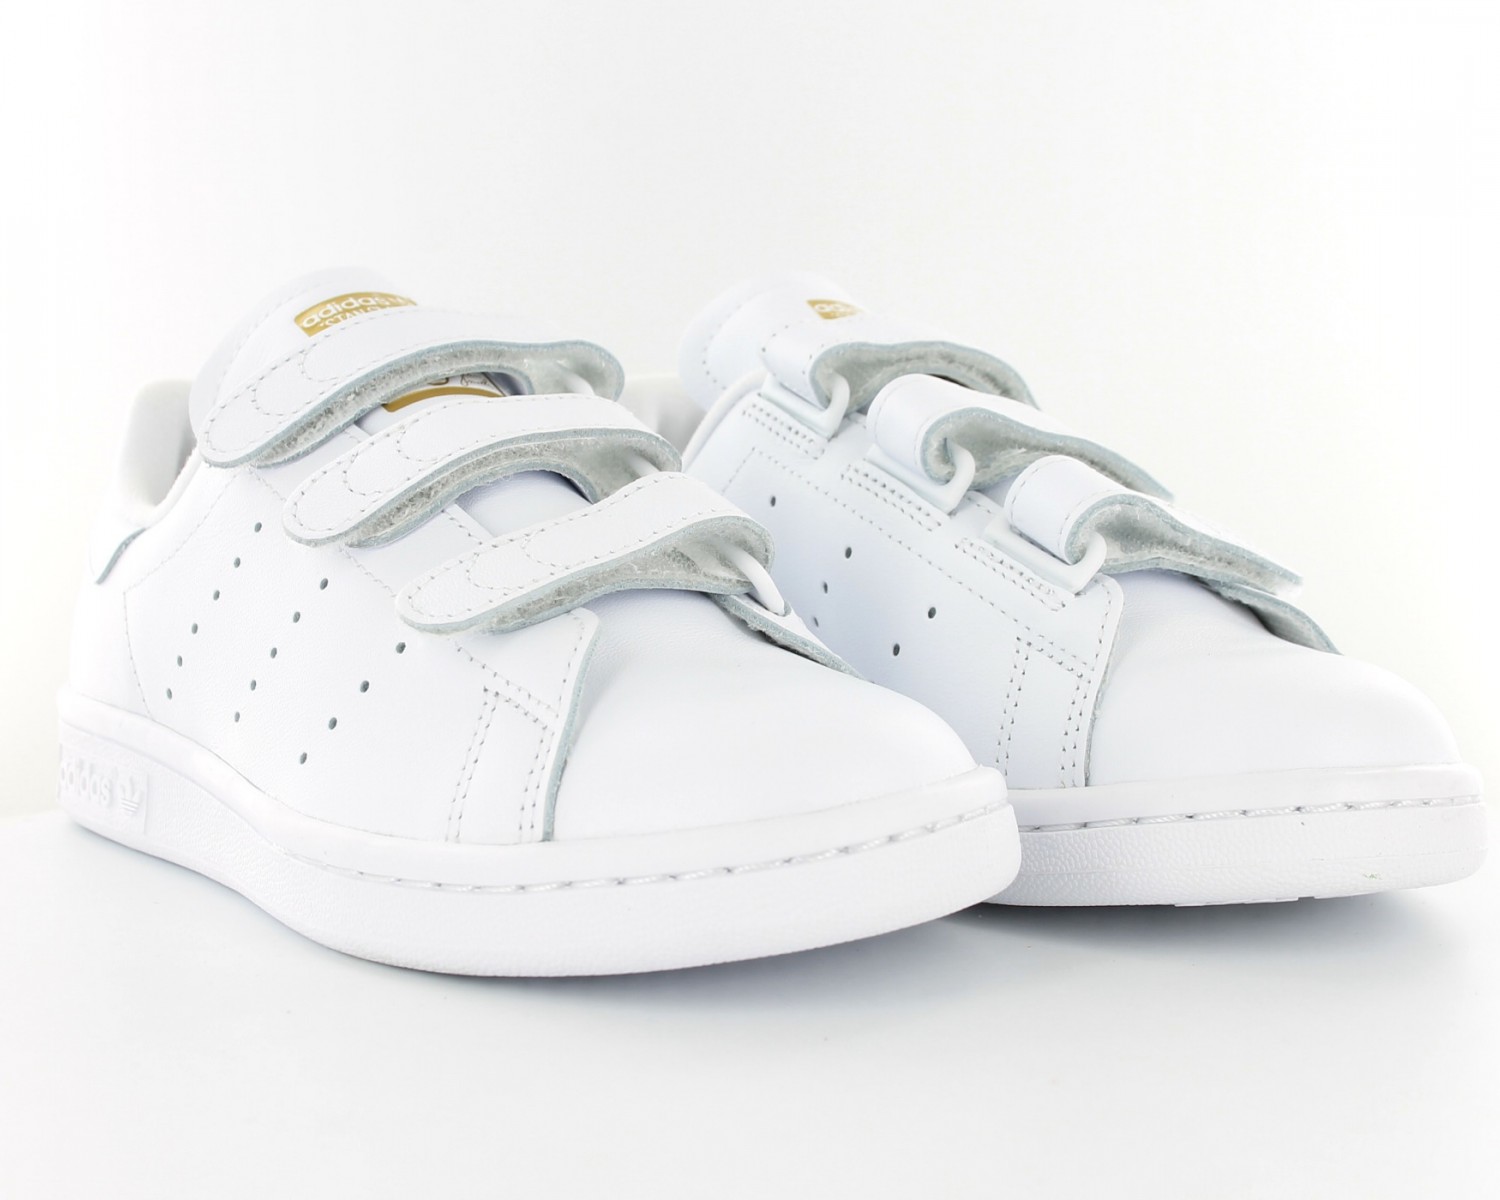 stan smith blanche et or